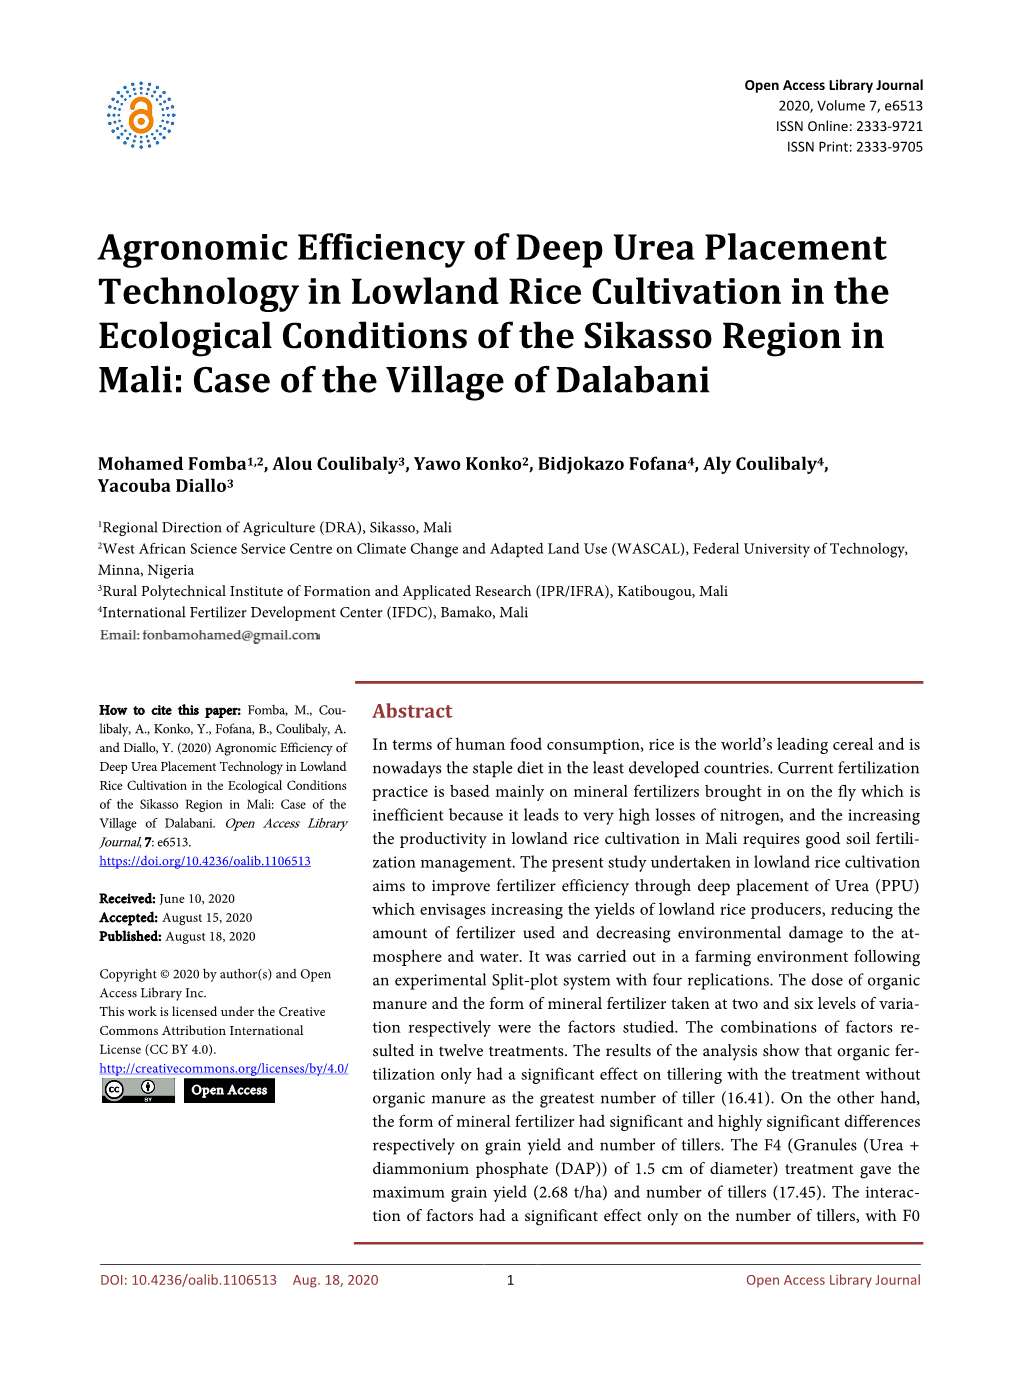 Agronomic Efficiency of Deep Urea Placement Technology in Lowland